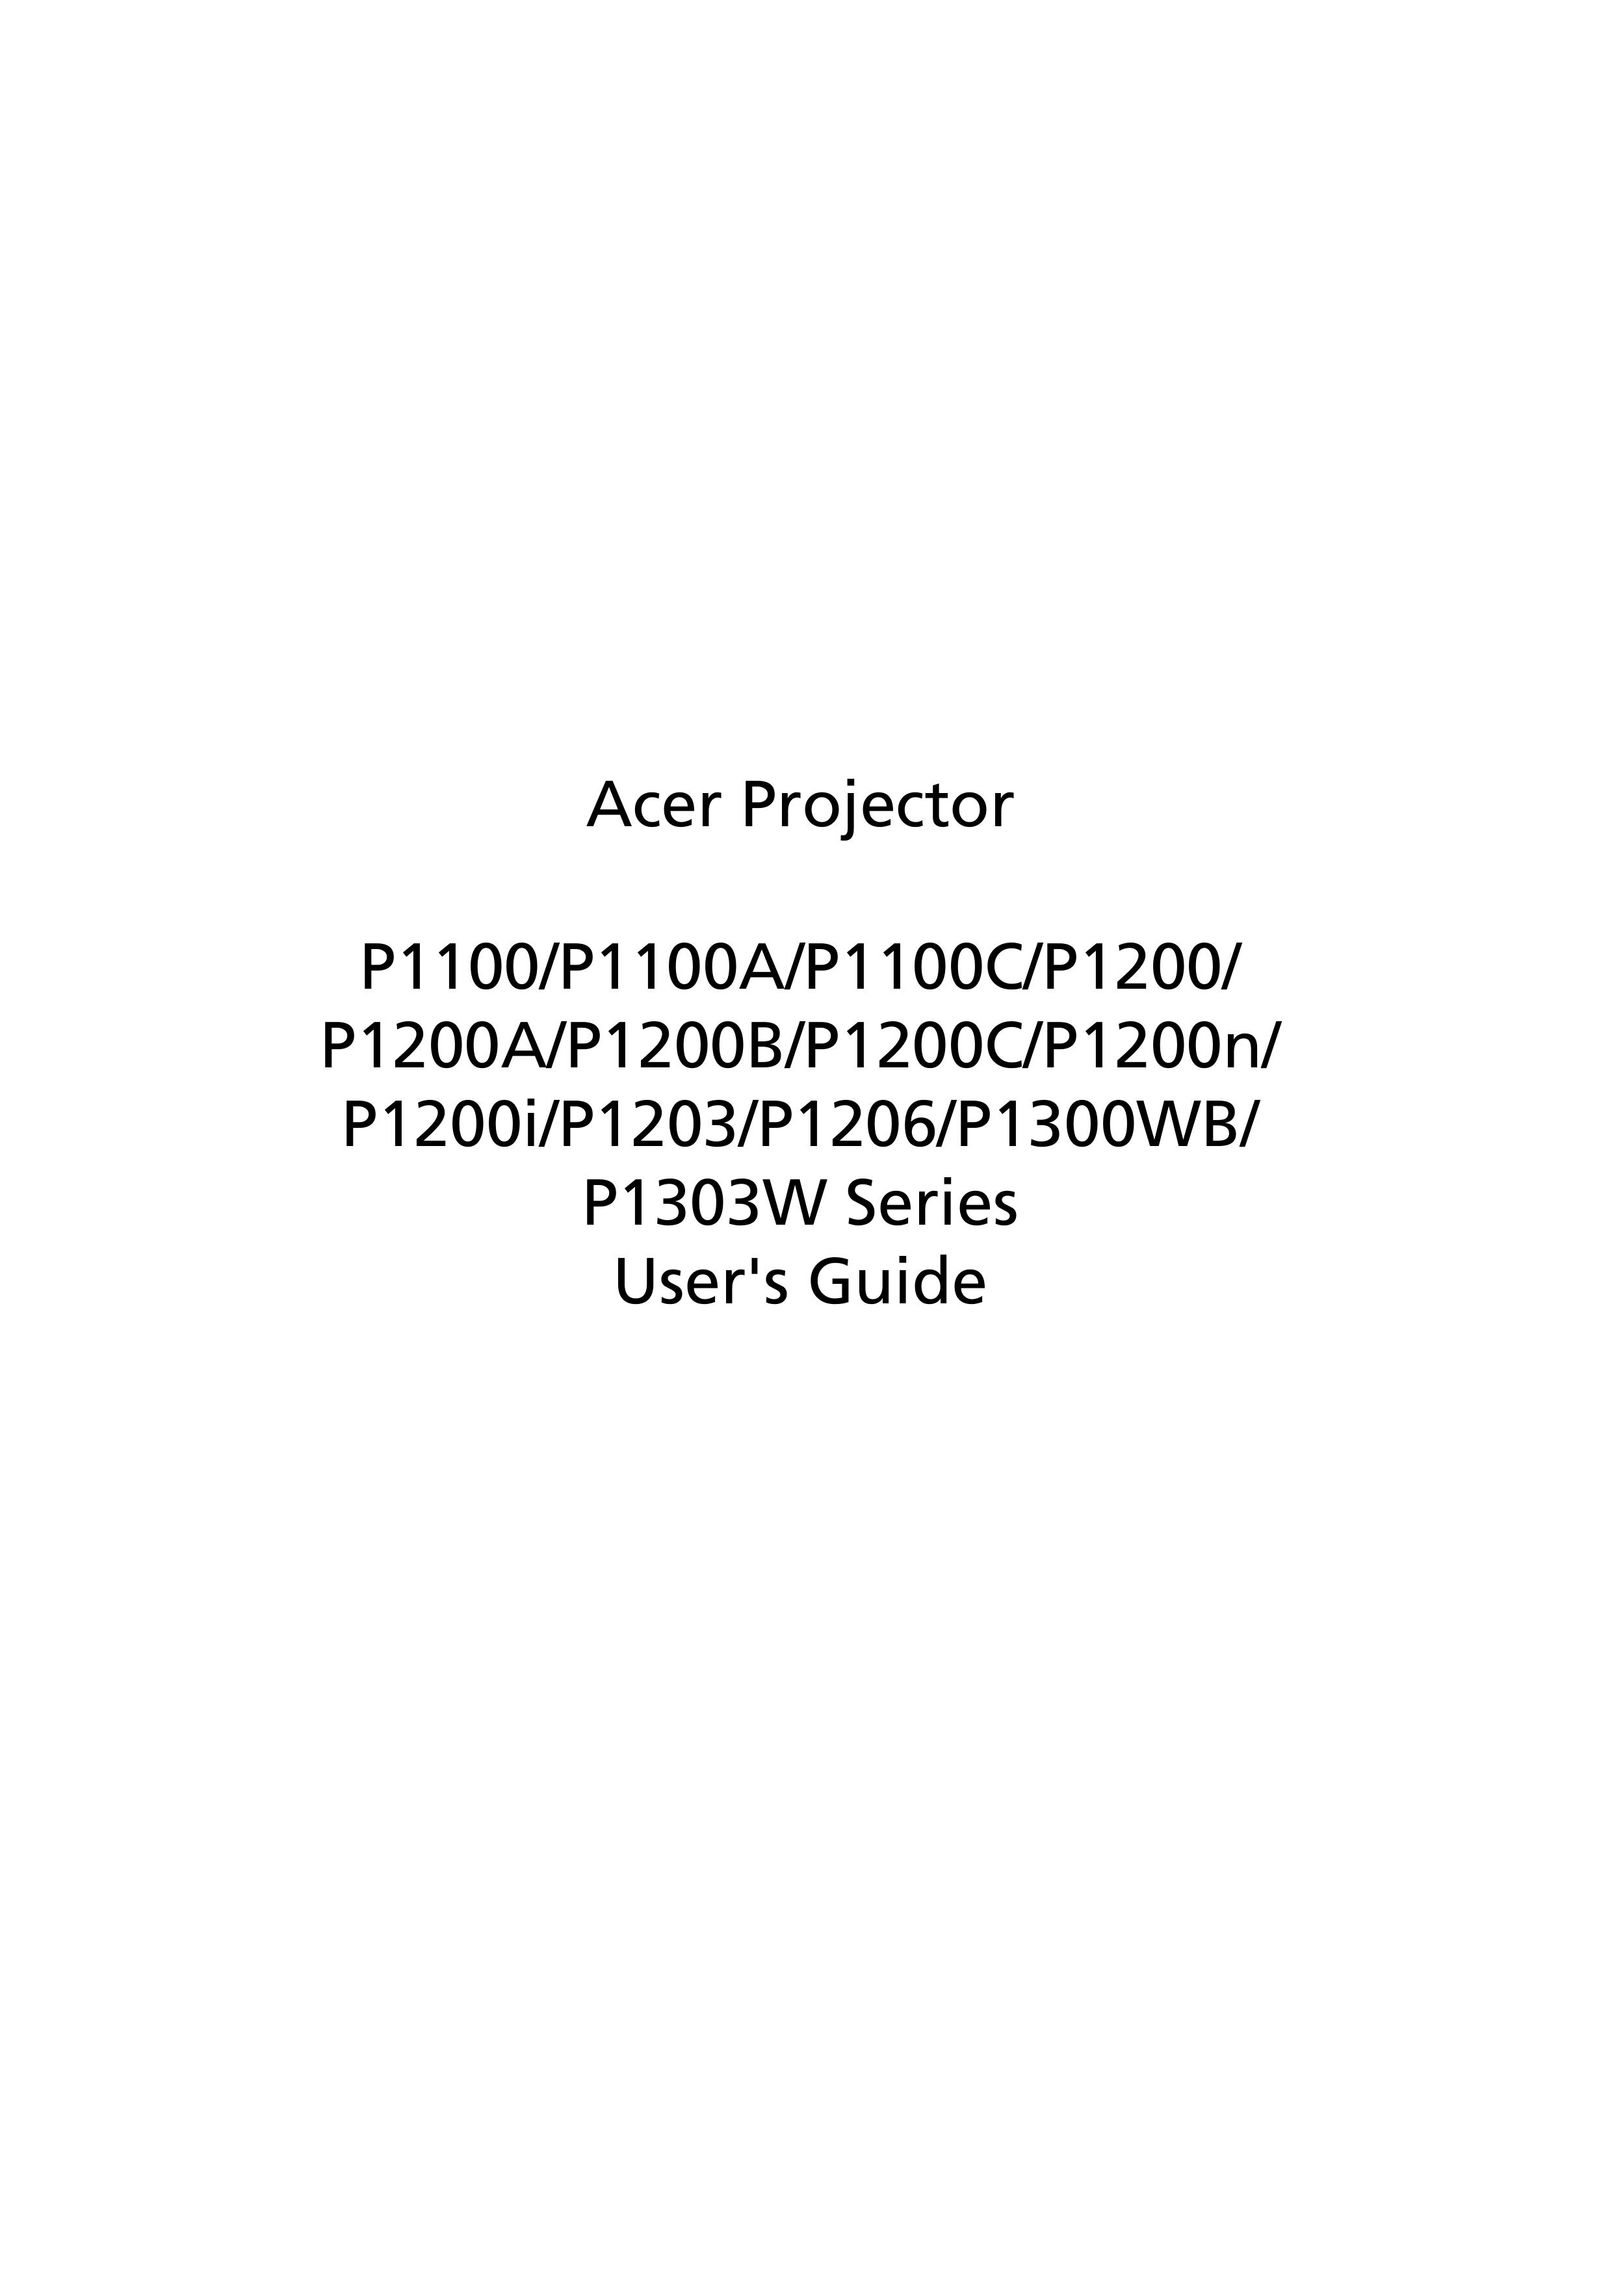 Acer P1200C Projector User Manual